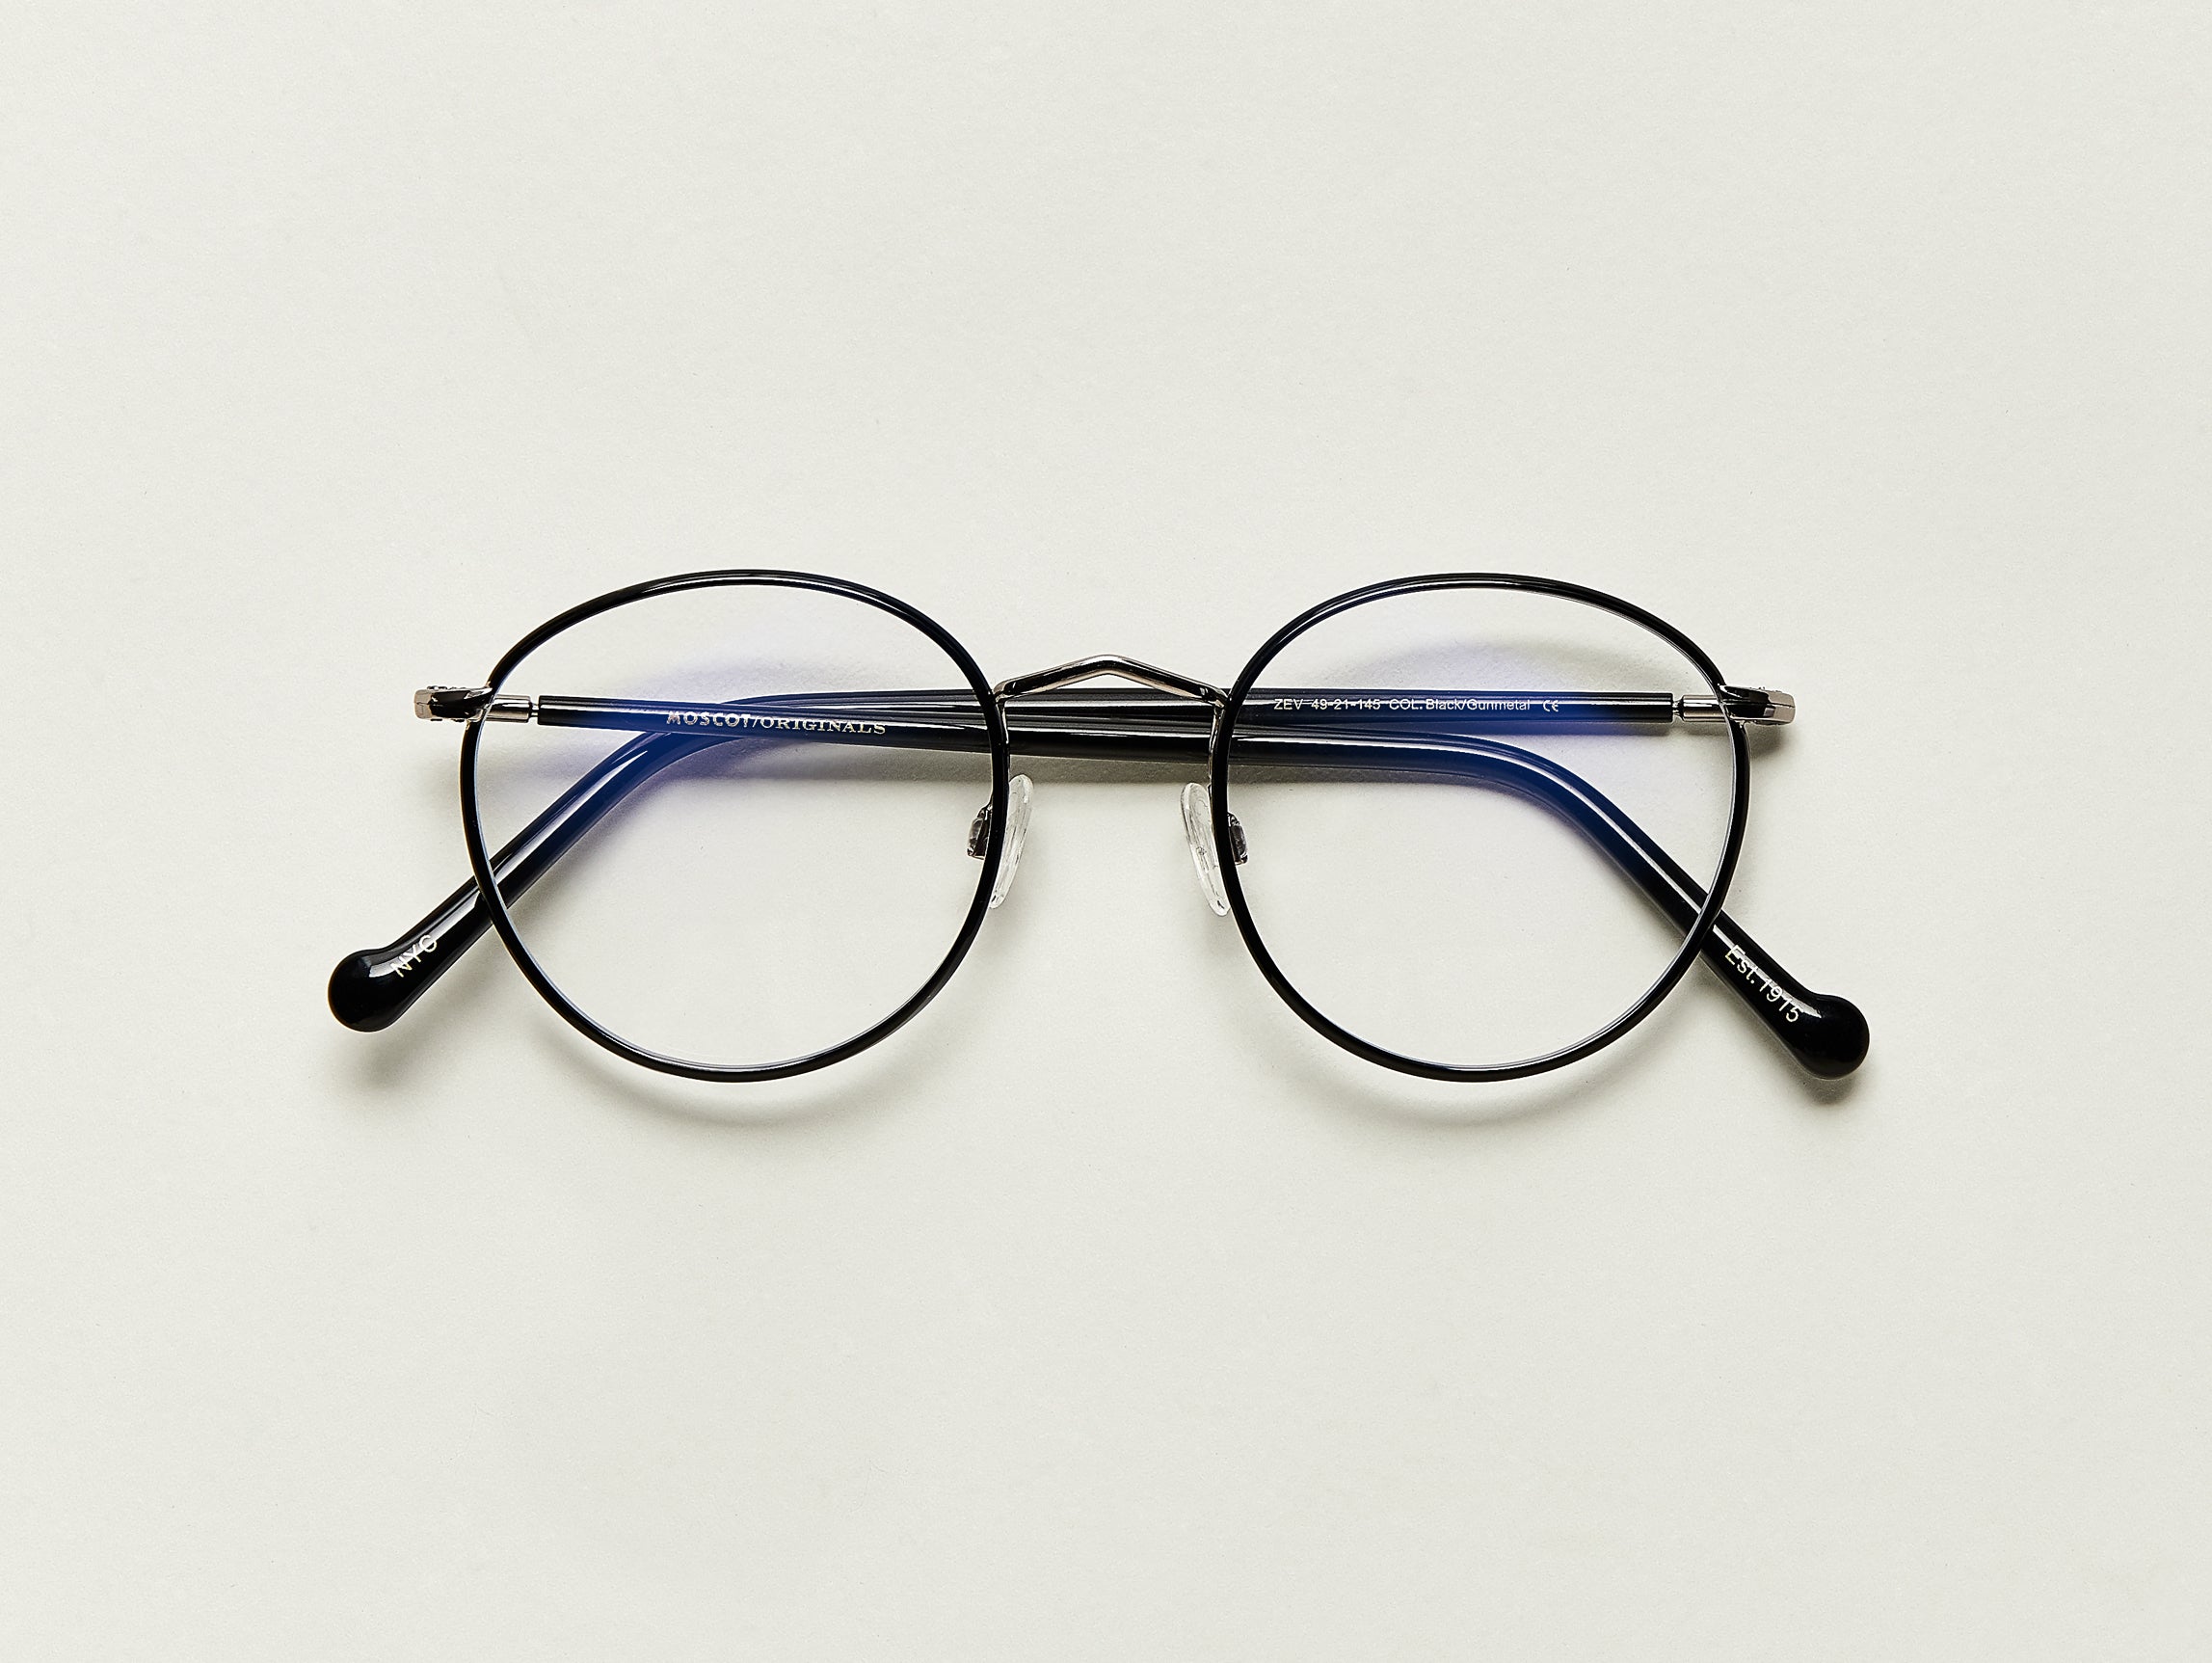 The ZEV in Black with Blue Protect Lenses